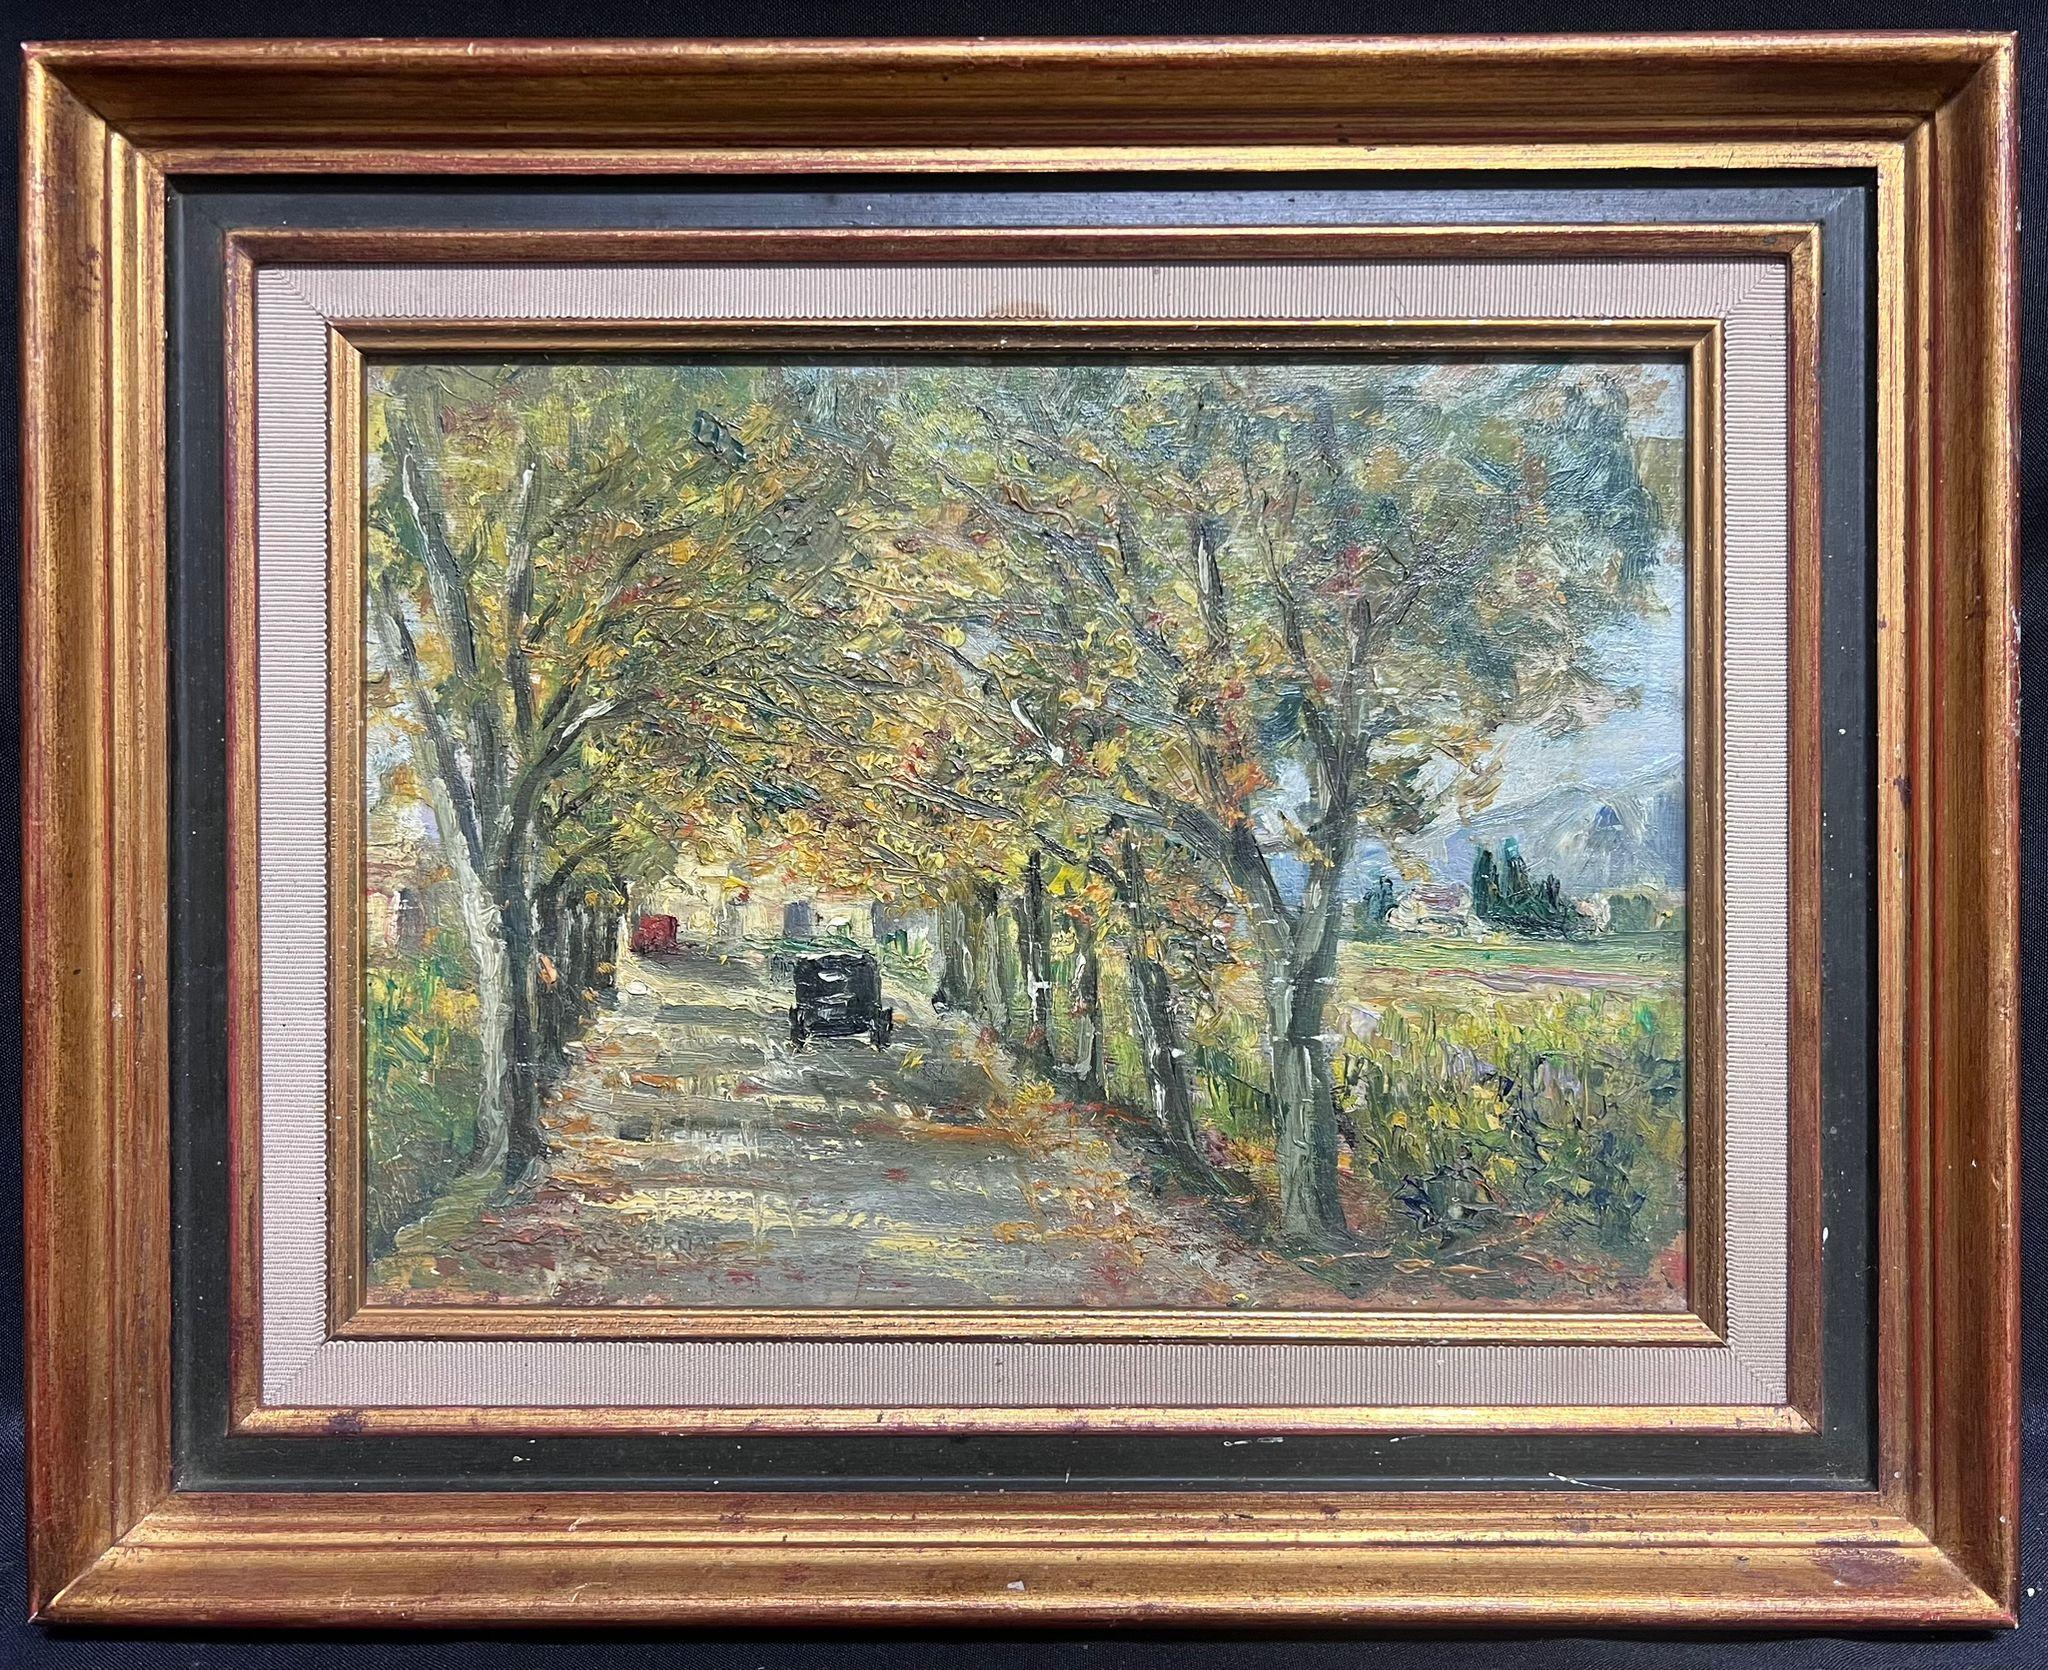 1930's French Oil Painting Vintage Car in Wooded Landscape Driveway